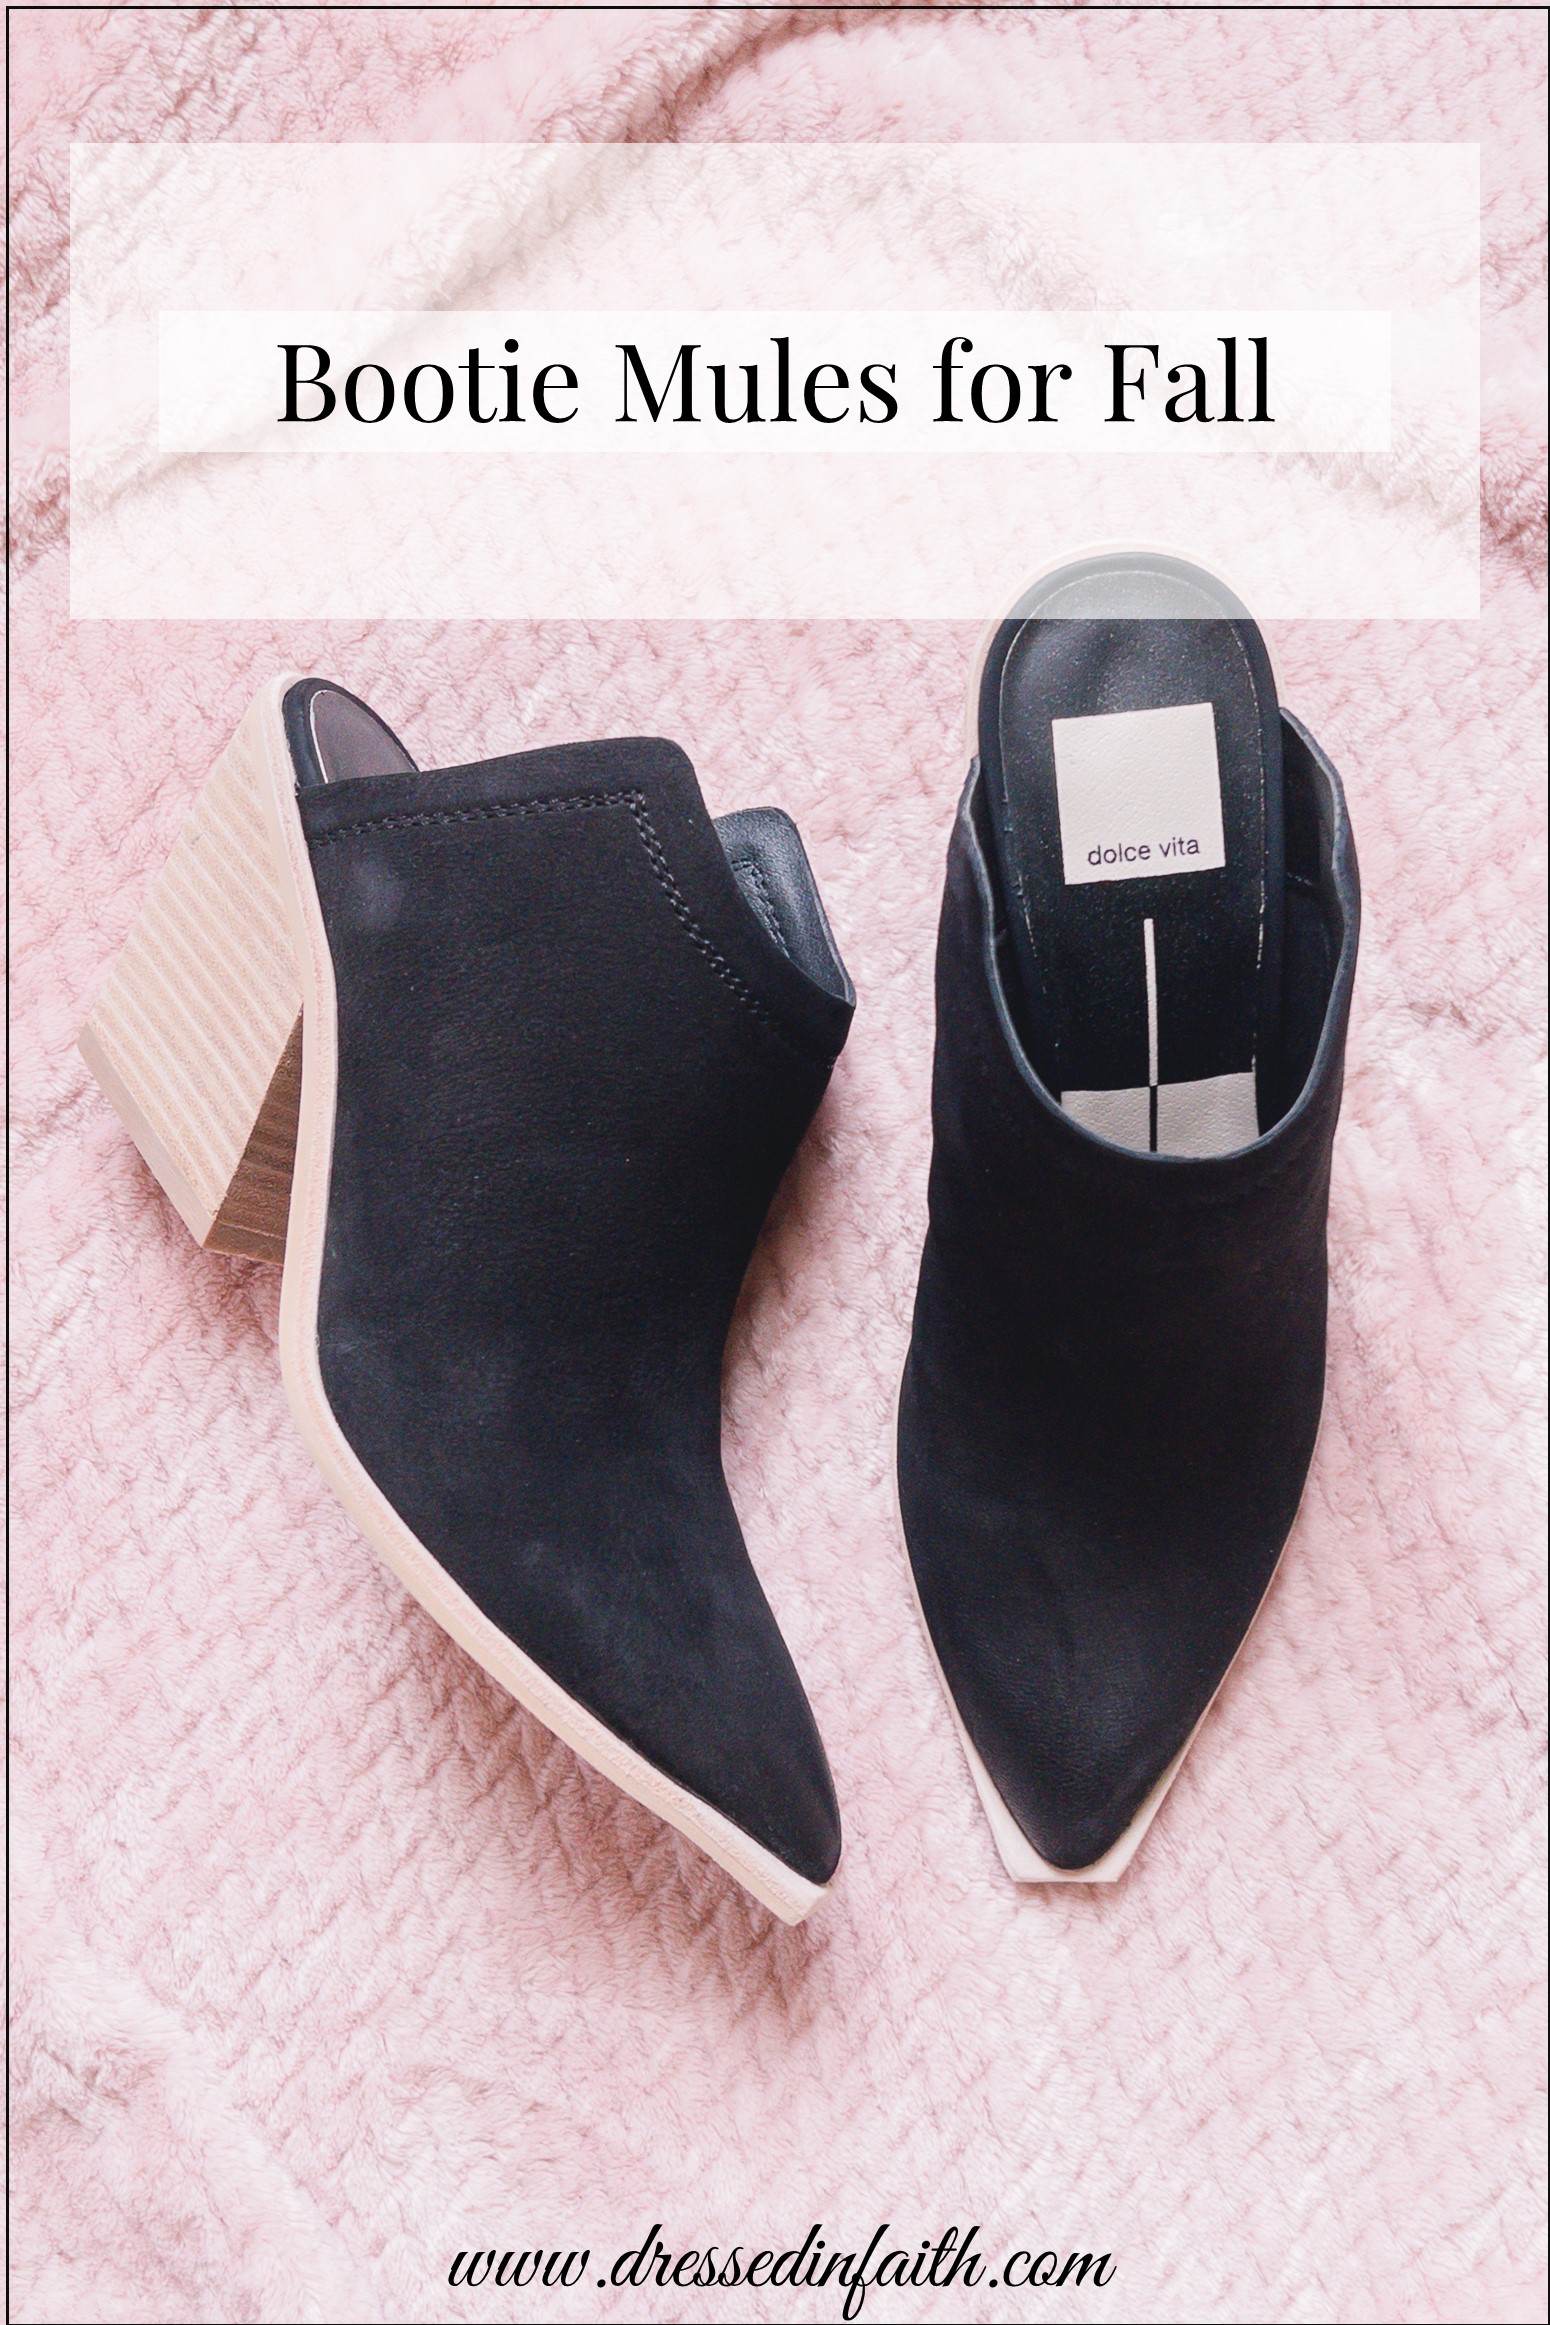 Bootie Mules for Fall